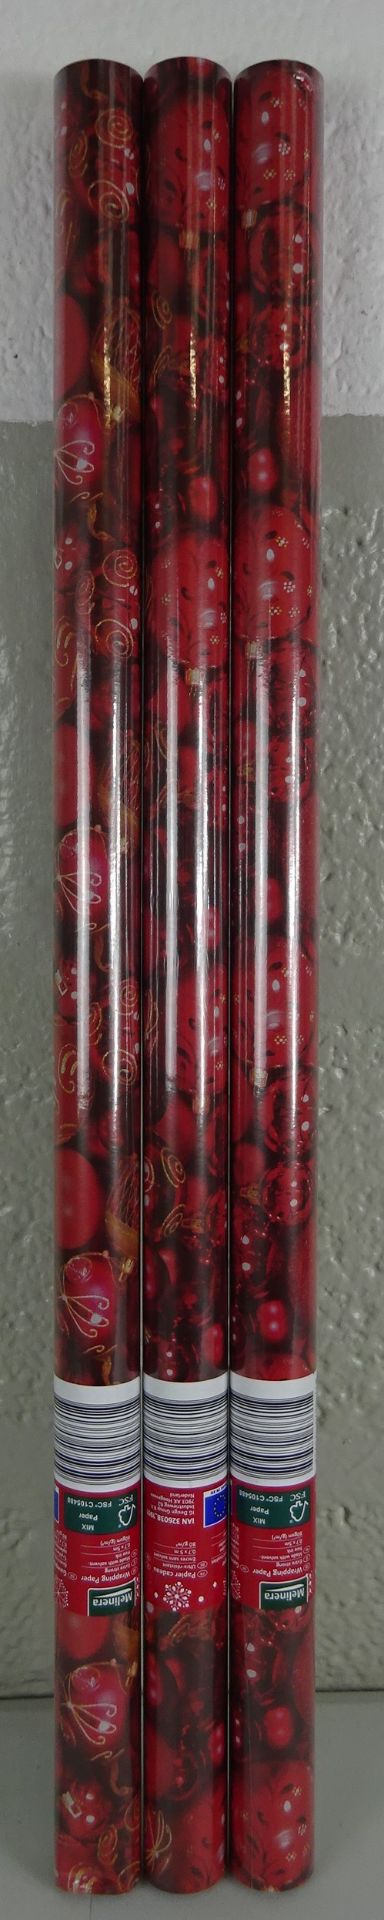 X3 BRAND NEW ROLLS OF RED BALL BALLS WRAPPING PAPER